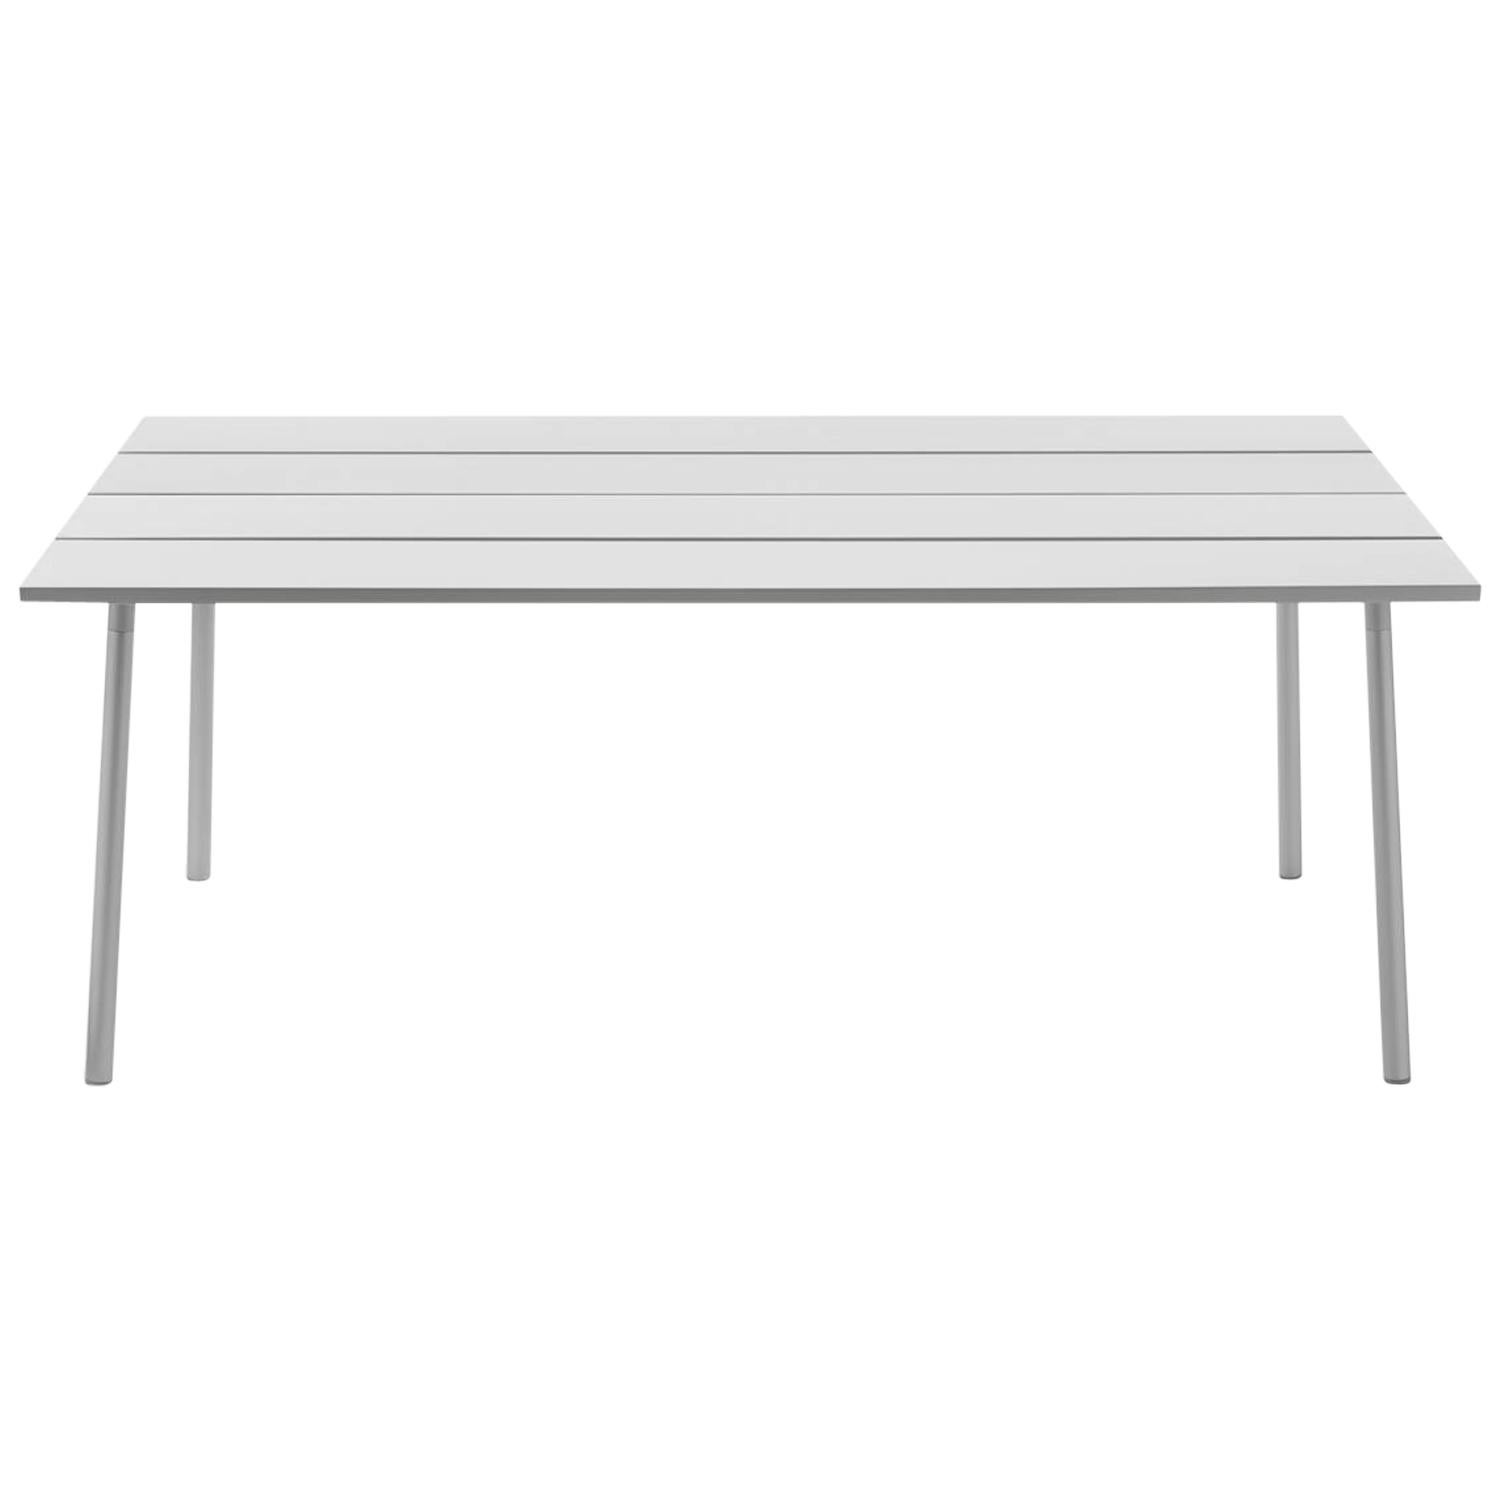 Emeco Run Large Table in Aluminum and Aluminum by Sam Hecht and Kim Colin For Sale